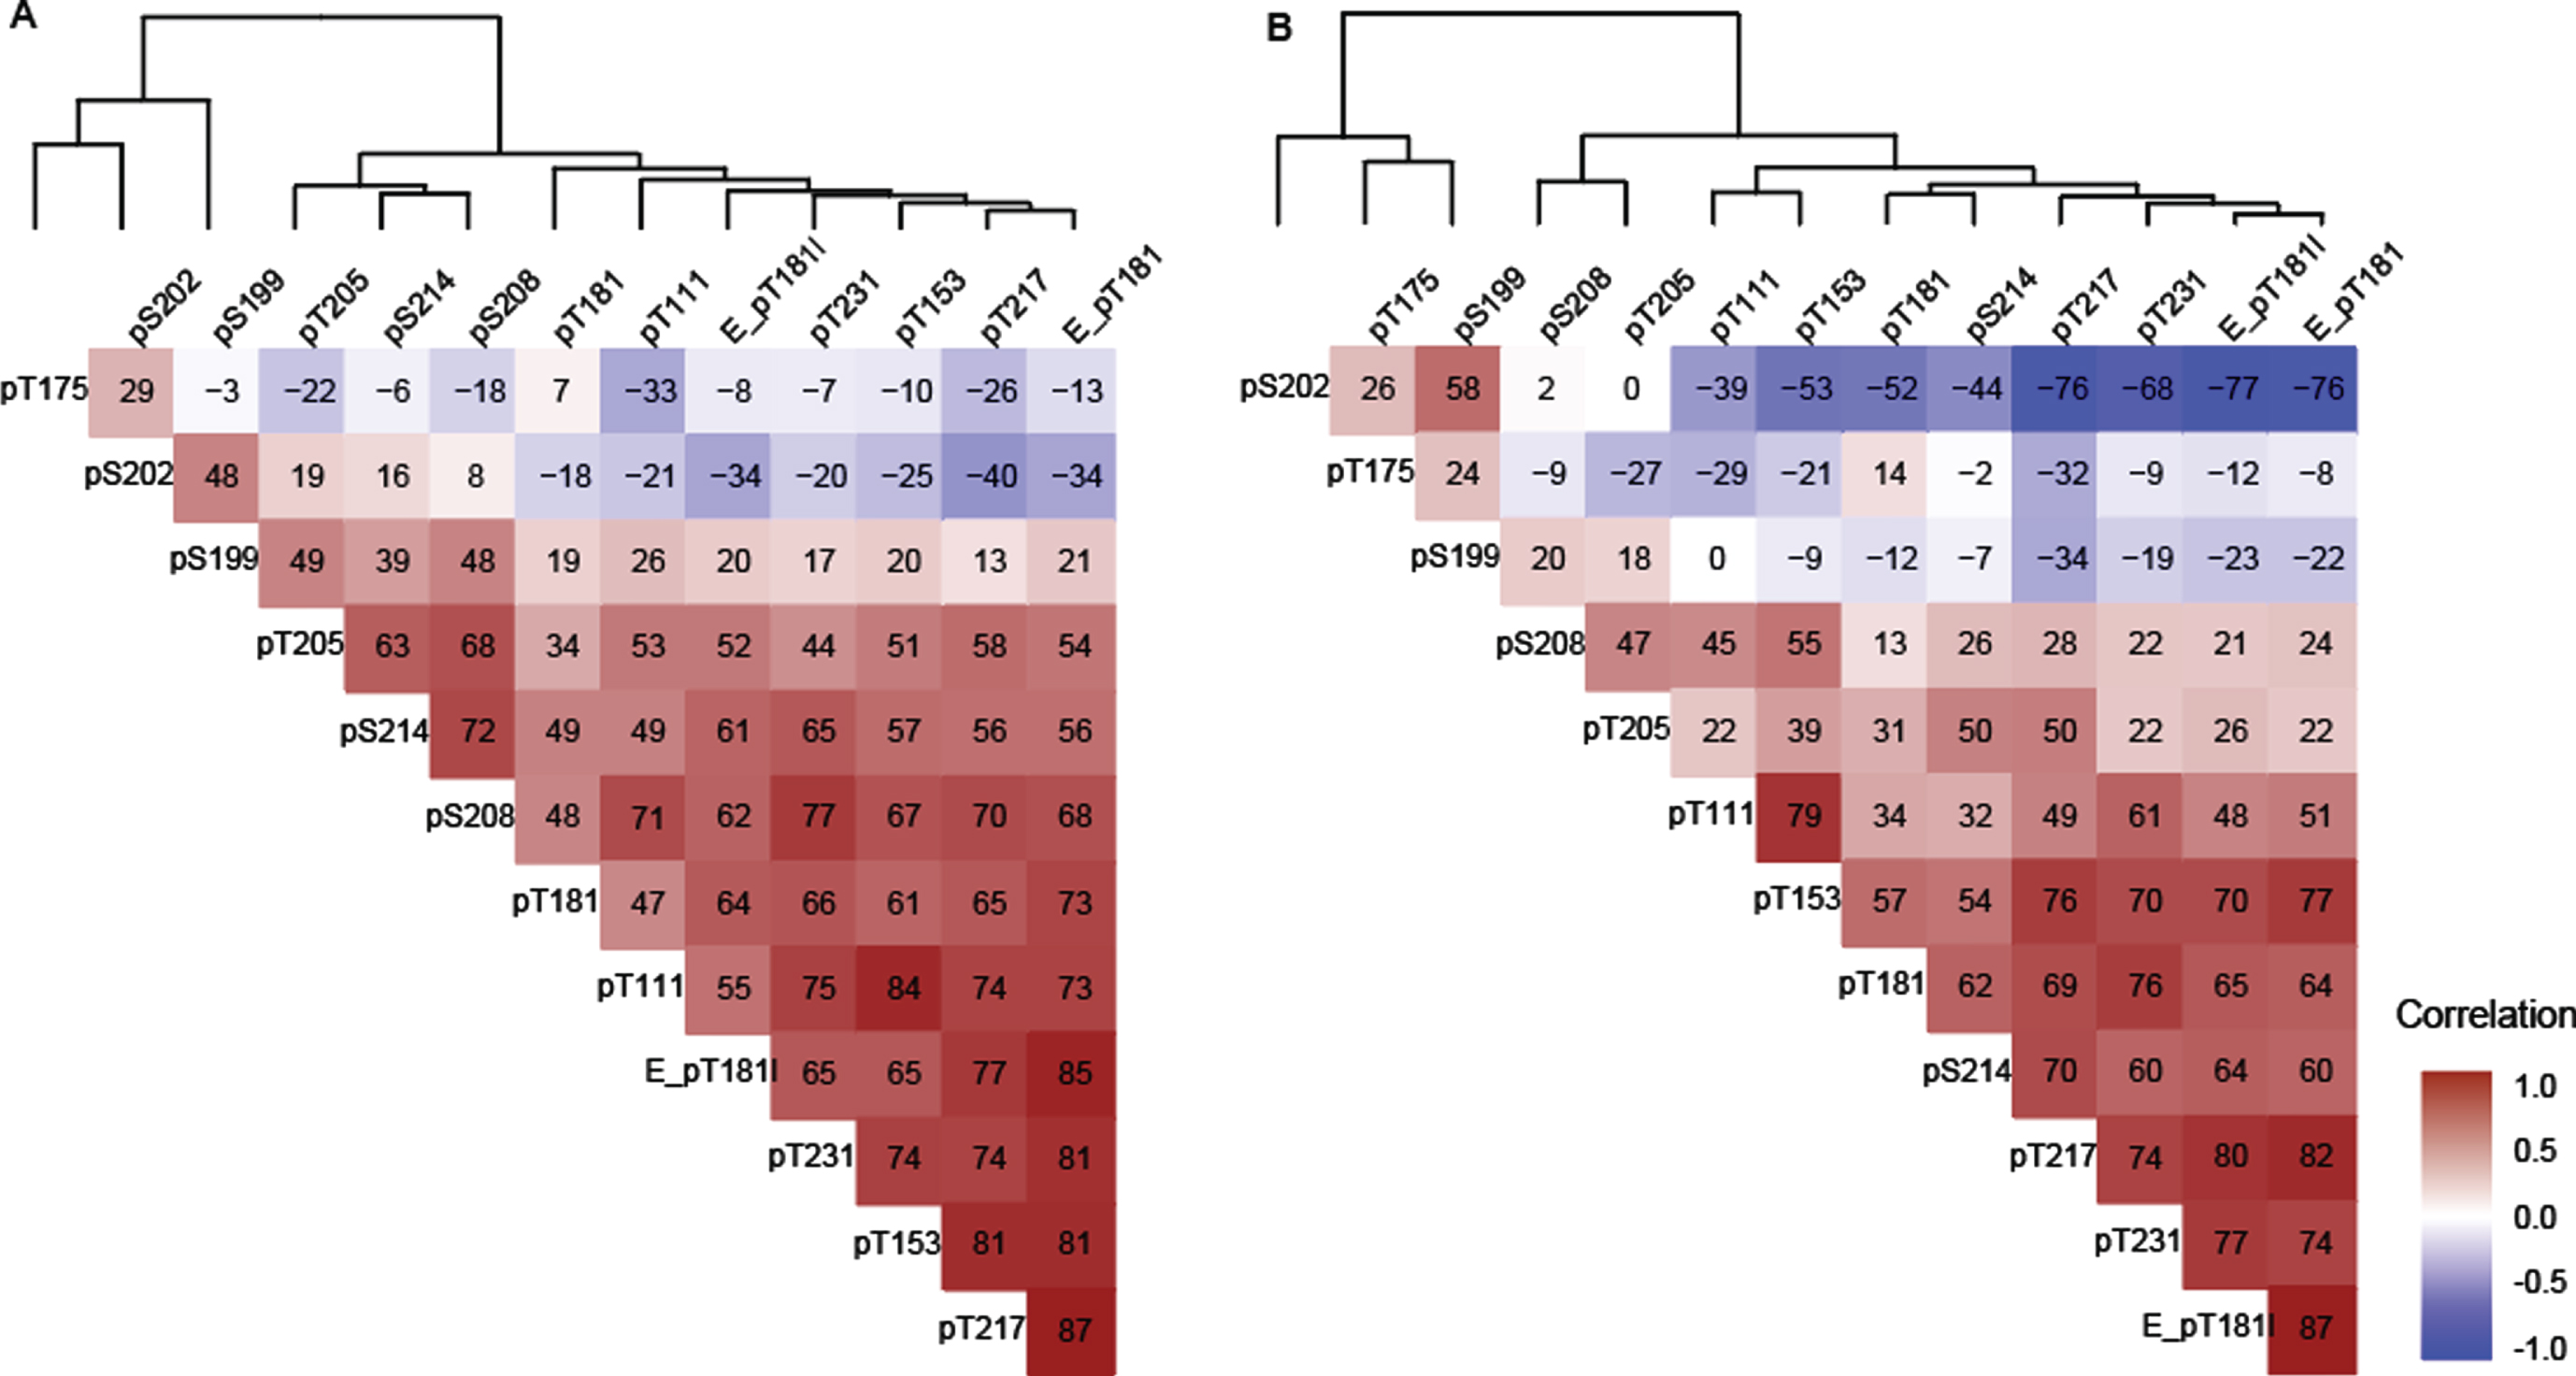 Spearman correlation (x 100) between tau phosphorylation ratios on monitored sites in (A) Cohort A, (B) Cohort B. The two cohorts support the identification of independent groups of association on site-specific phosphorylation occupancies that shift with disease severity. The dendrogram represents clusters of CSF hyperphosphorylation at different sites in Cohort A and resembles the pattern similarities seen in Fig. 1. Red highlight indicates positive correlation, white no correlation, blue negative correlation. Elecsys level (pg/mL):E_pT181l, Elecsys ratio (pTau181/tTau):(E_pT181), others are corresponding MS ratio pTau/uTau).